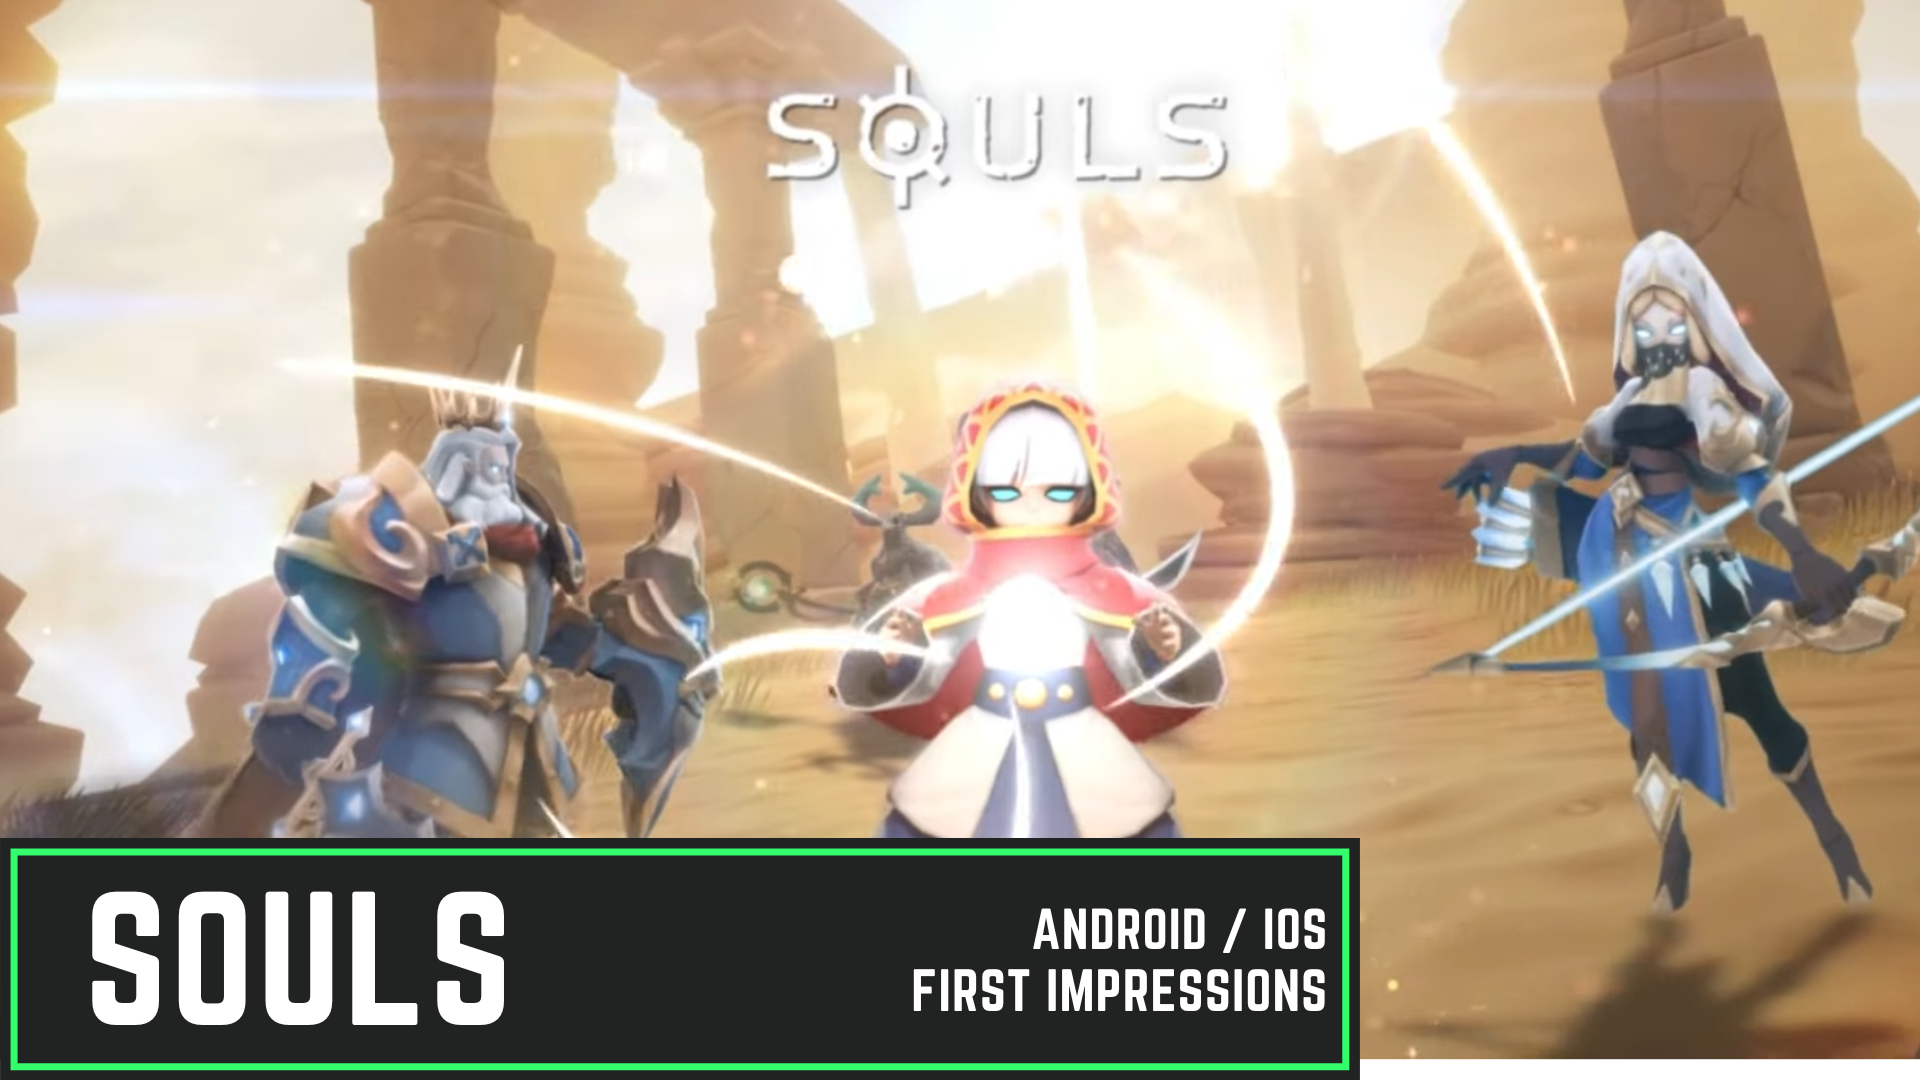 This auto-chess game misled me into thinking that it's an adventure game | Impressions - SOULS